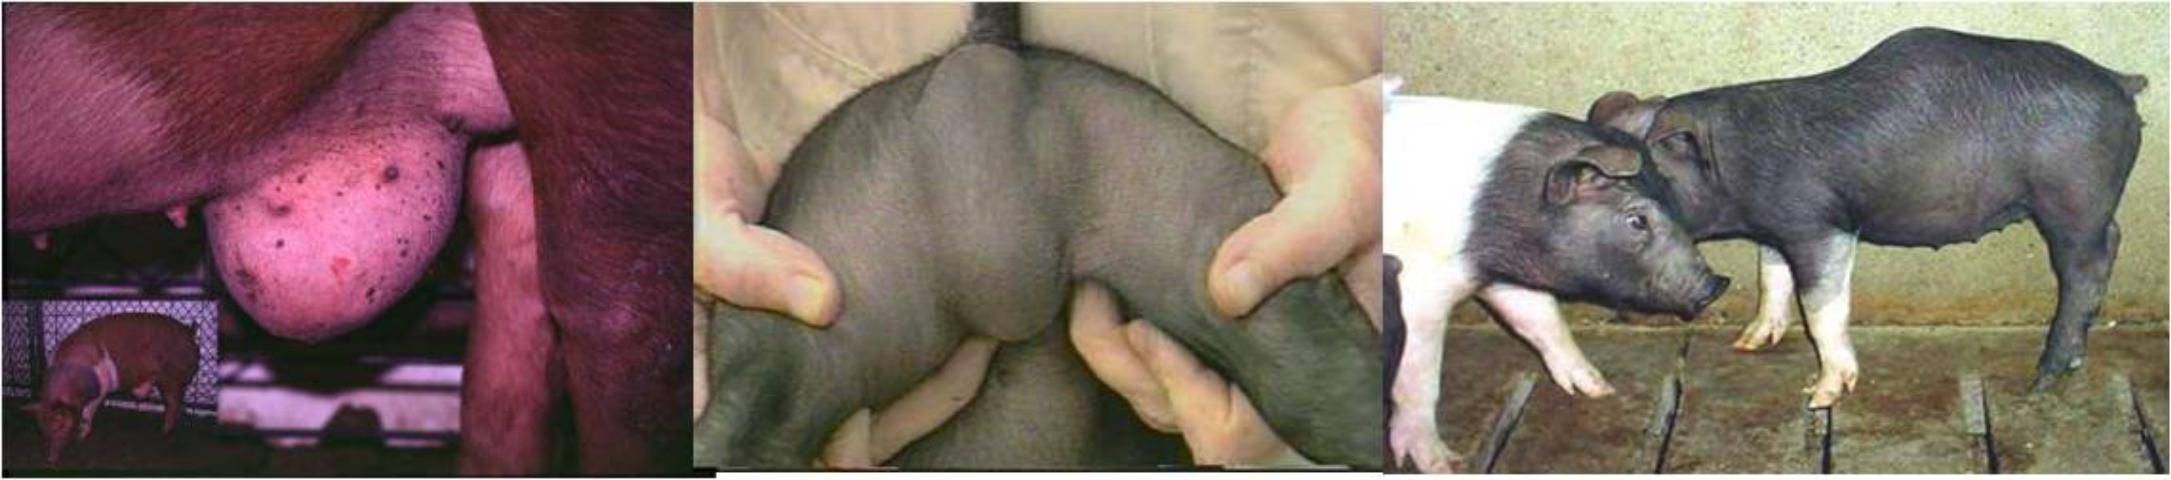 Figure 4. From left to right: a pig with an umbilical hernia, a pig with a scrotal hernia, and a pig with kyphosis or hump-back.